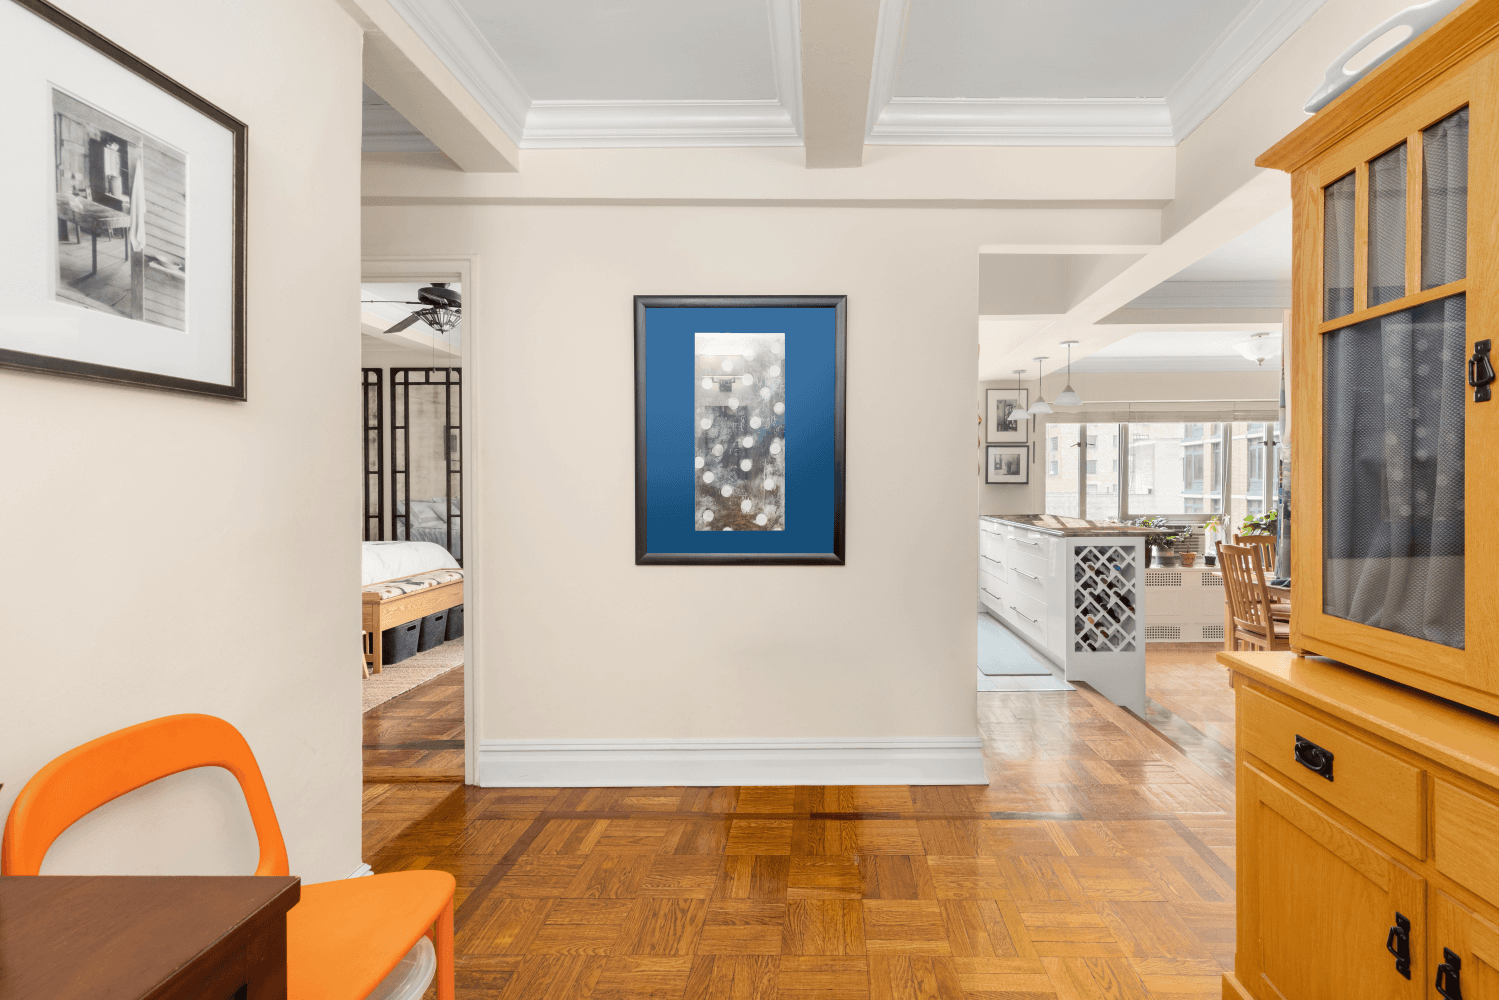 Everything you want in a classic pre war one bedroom home will be found here at the famed art deco Goodhue House.